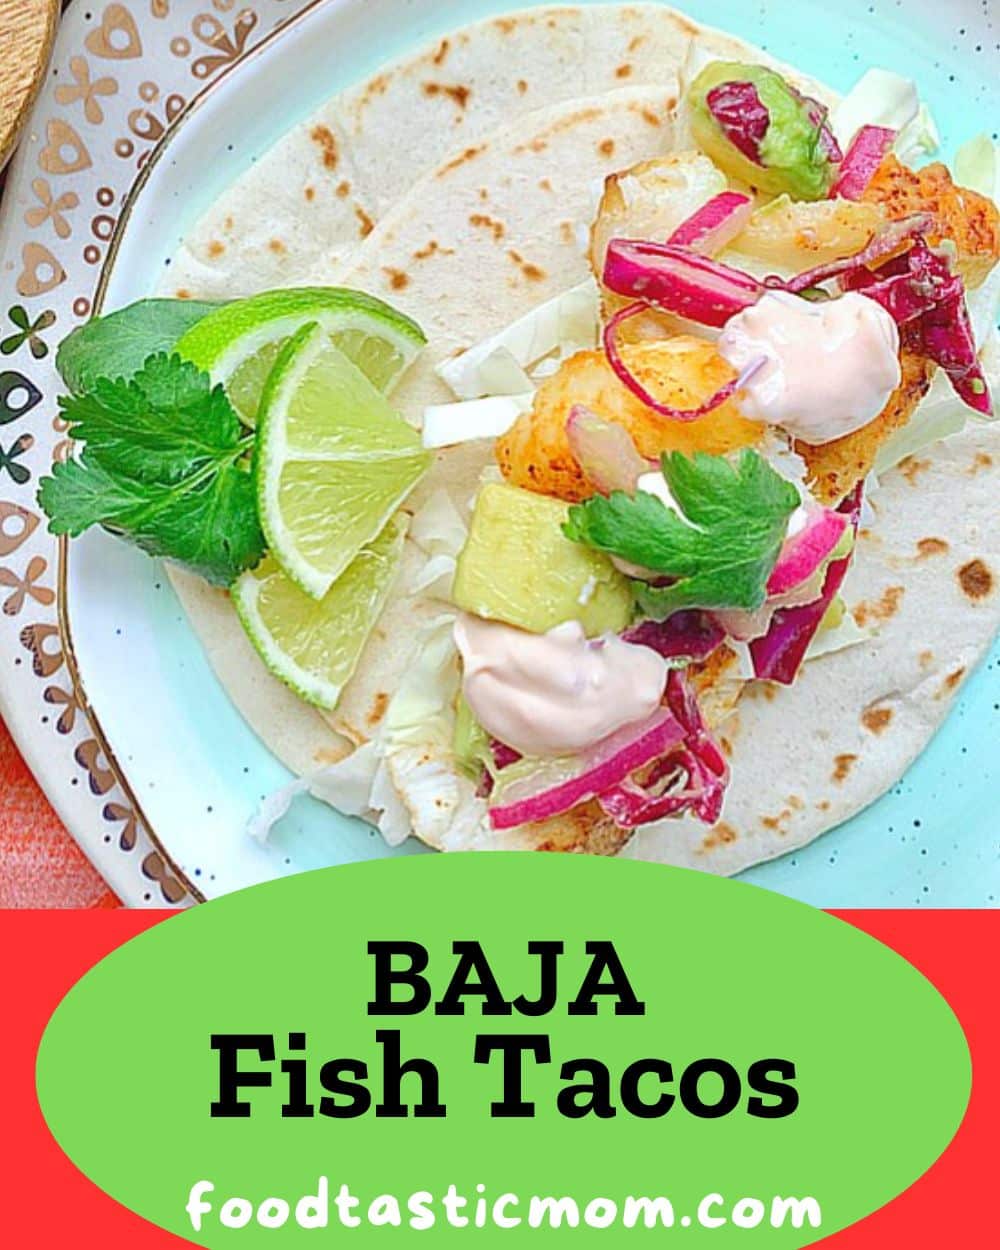 Perfectly seasoned halibut combines with a quick pickled avocado salsa, shredded cabbage and a creamy white sauce for these Baja Fish Tacos that are simply the best. via @foodtasticmom